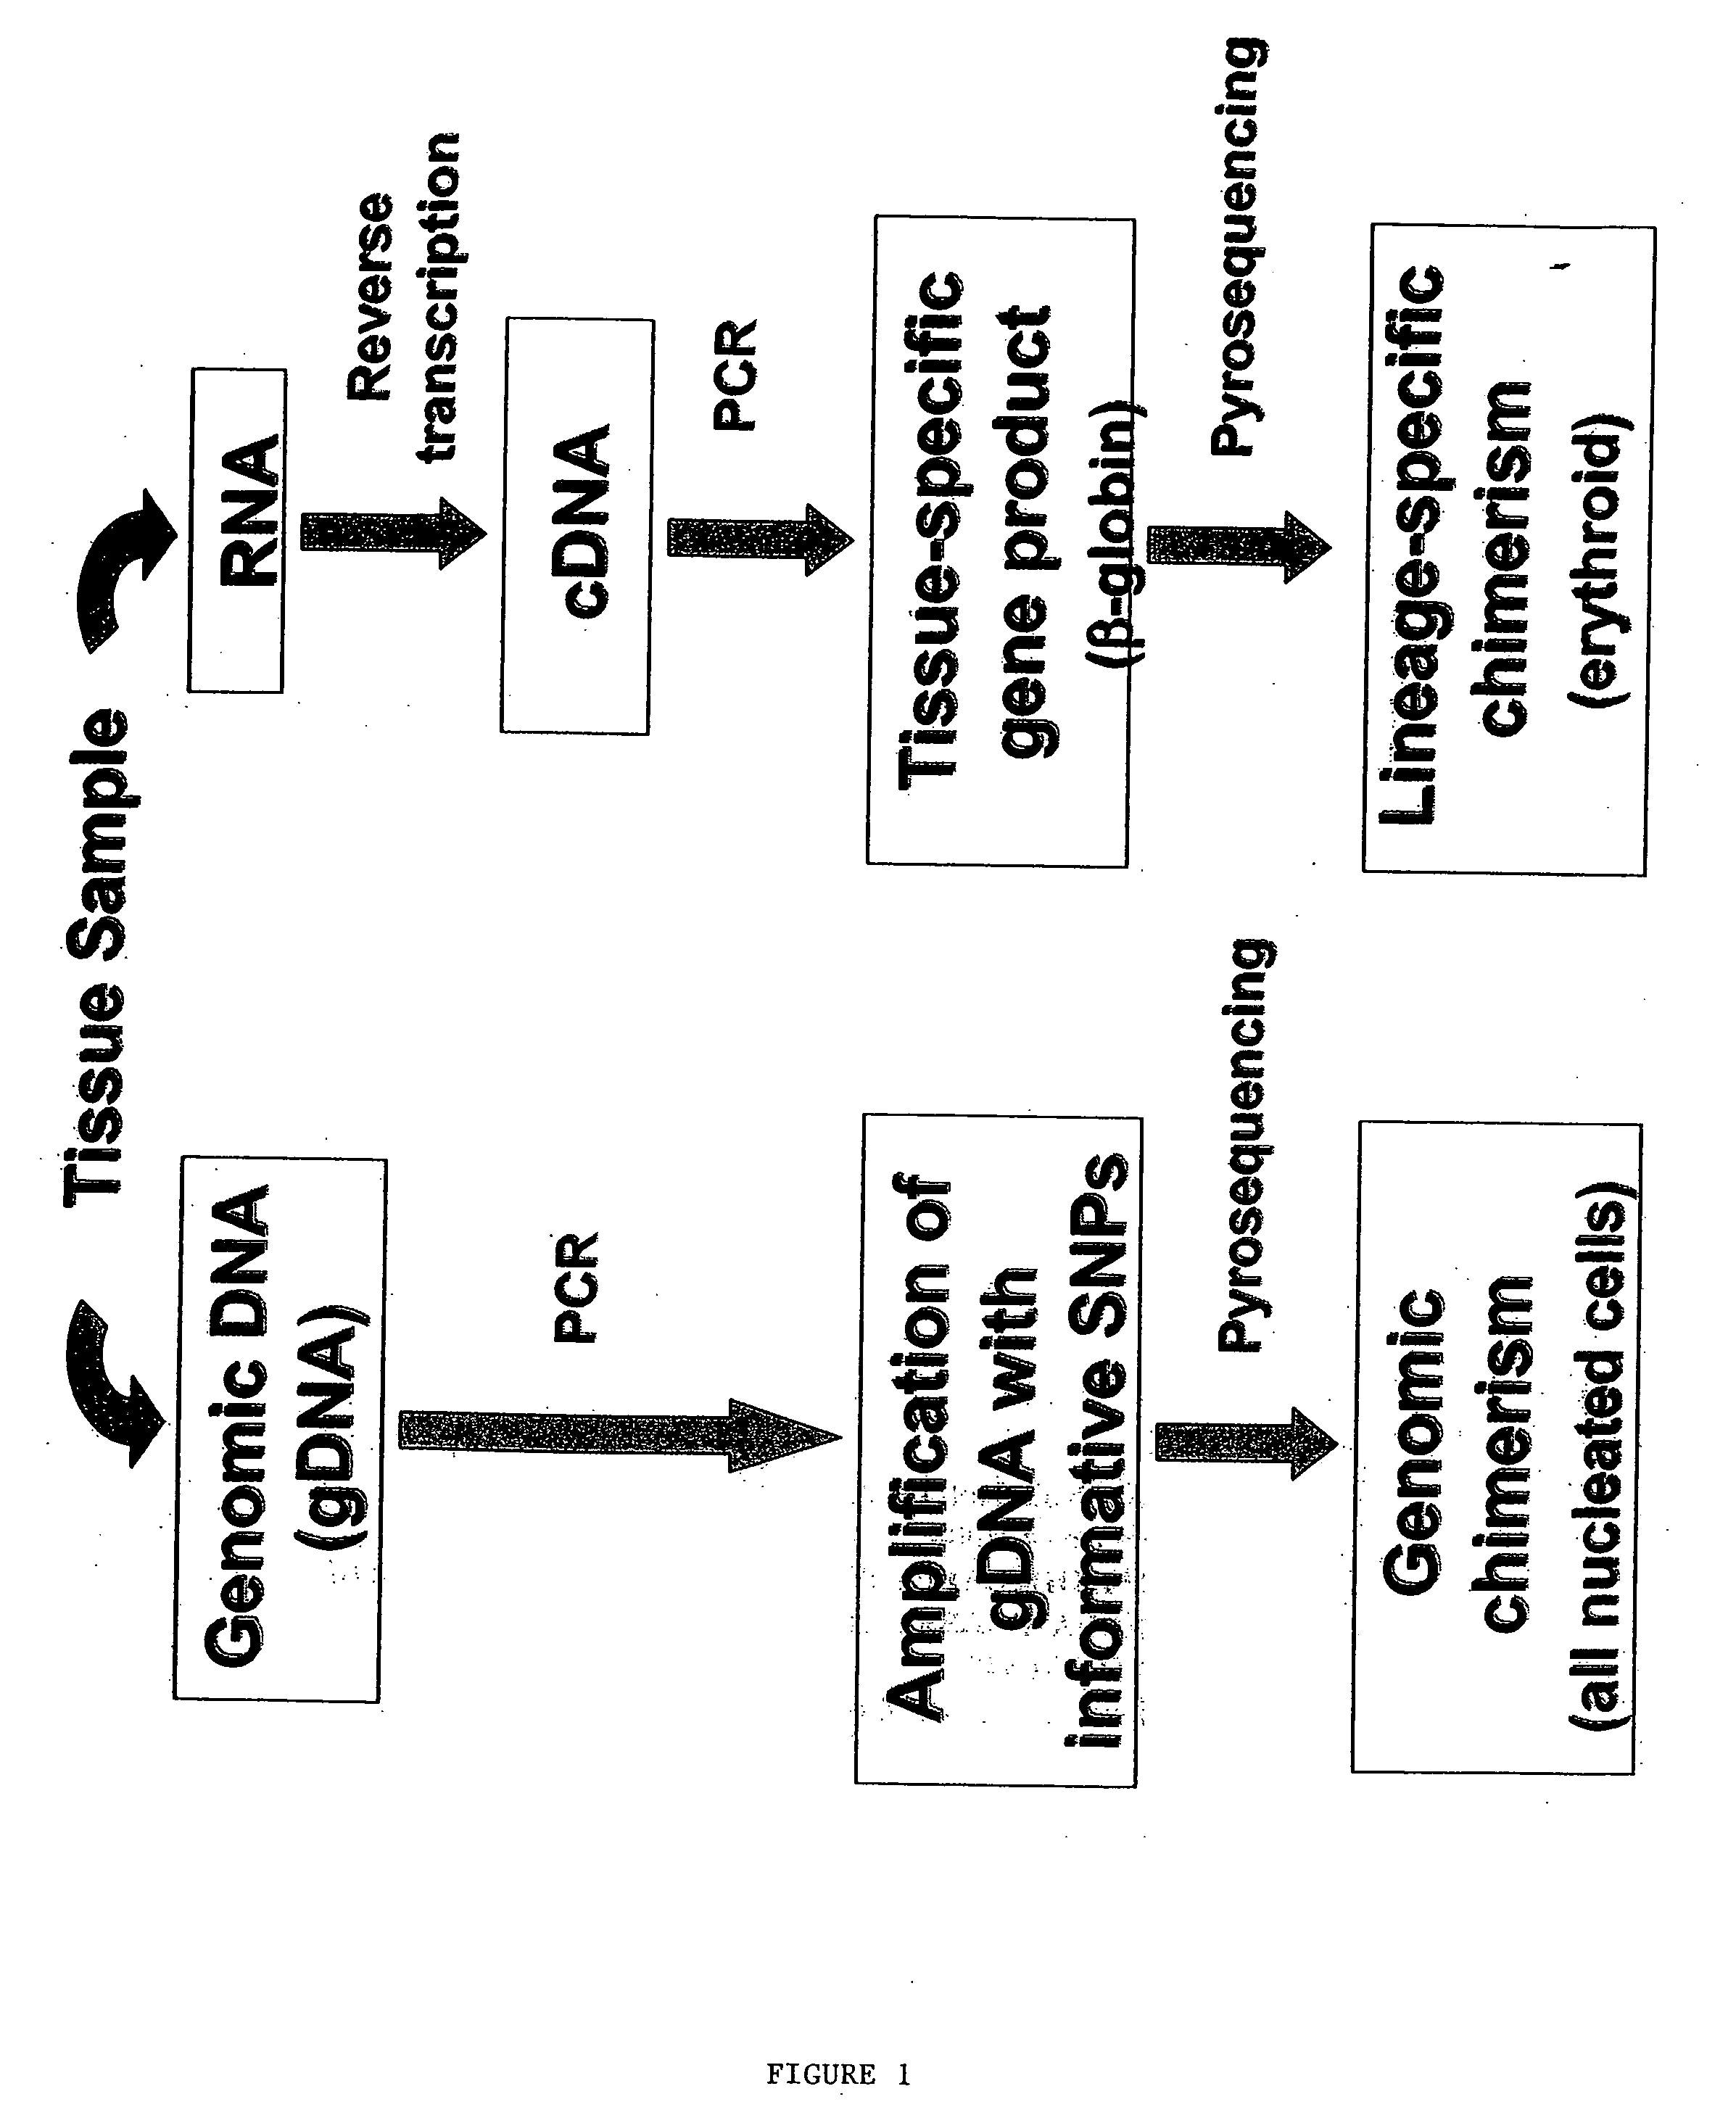 Methods to detect lineage-specific cells